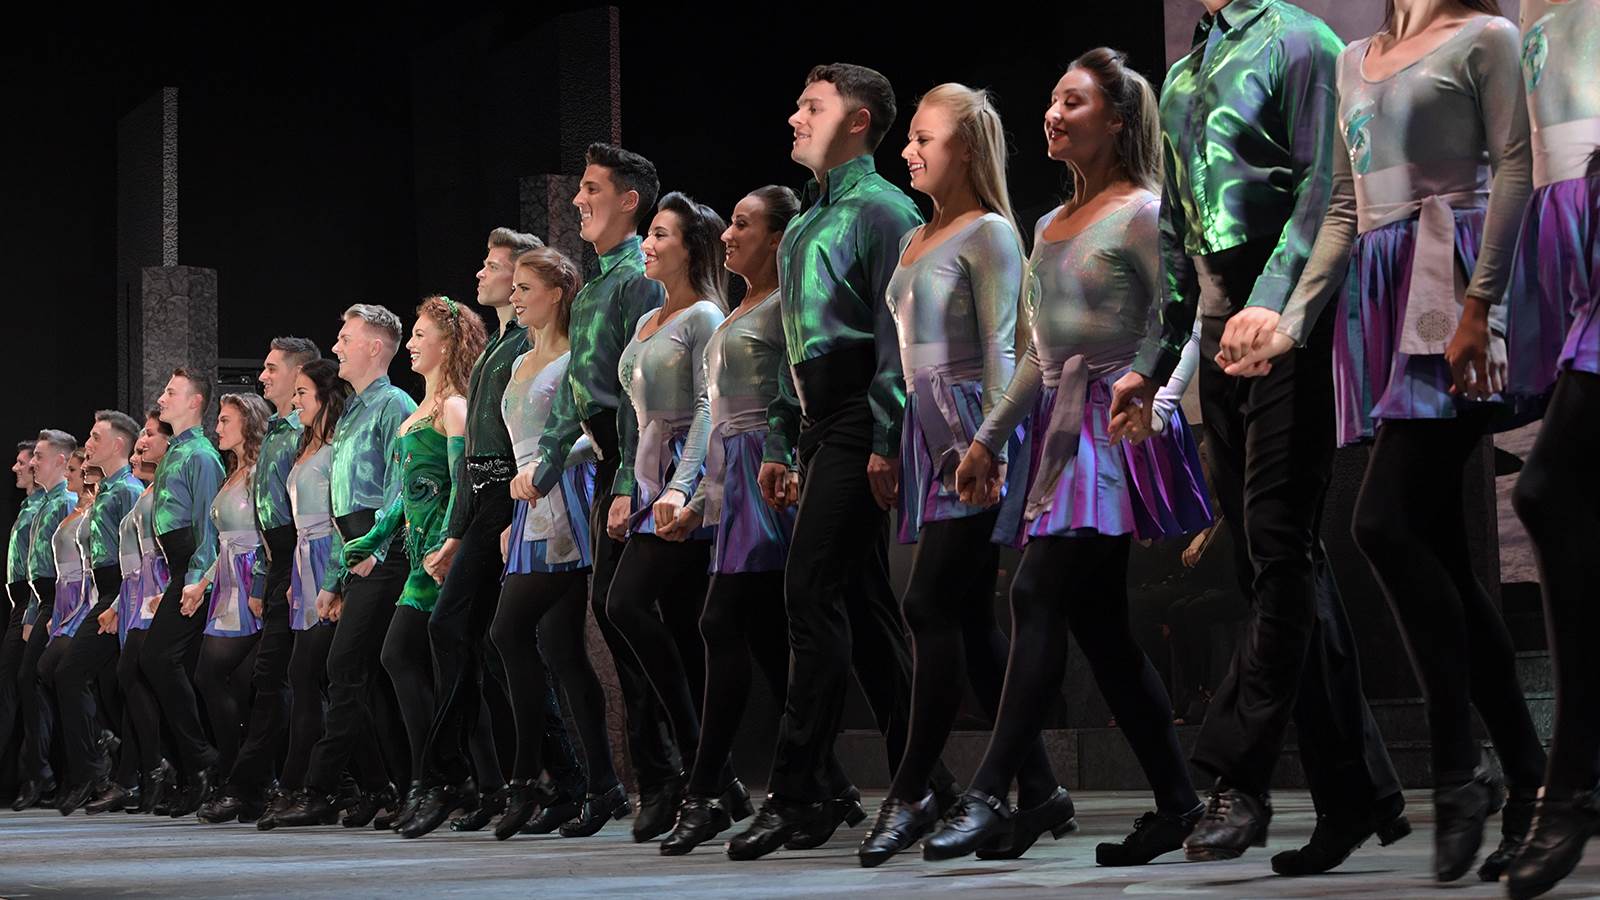 Kennedy Center Schedule 2022 Riverdance | The John F. Kennedy Center For The Performing Arts